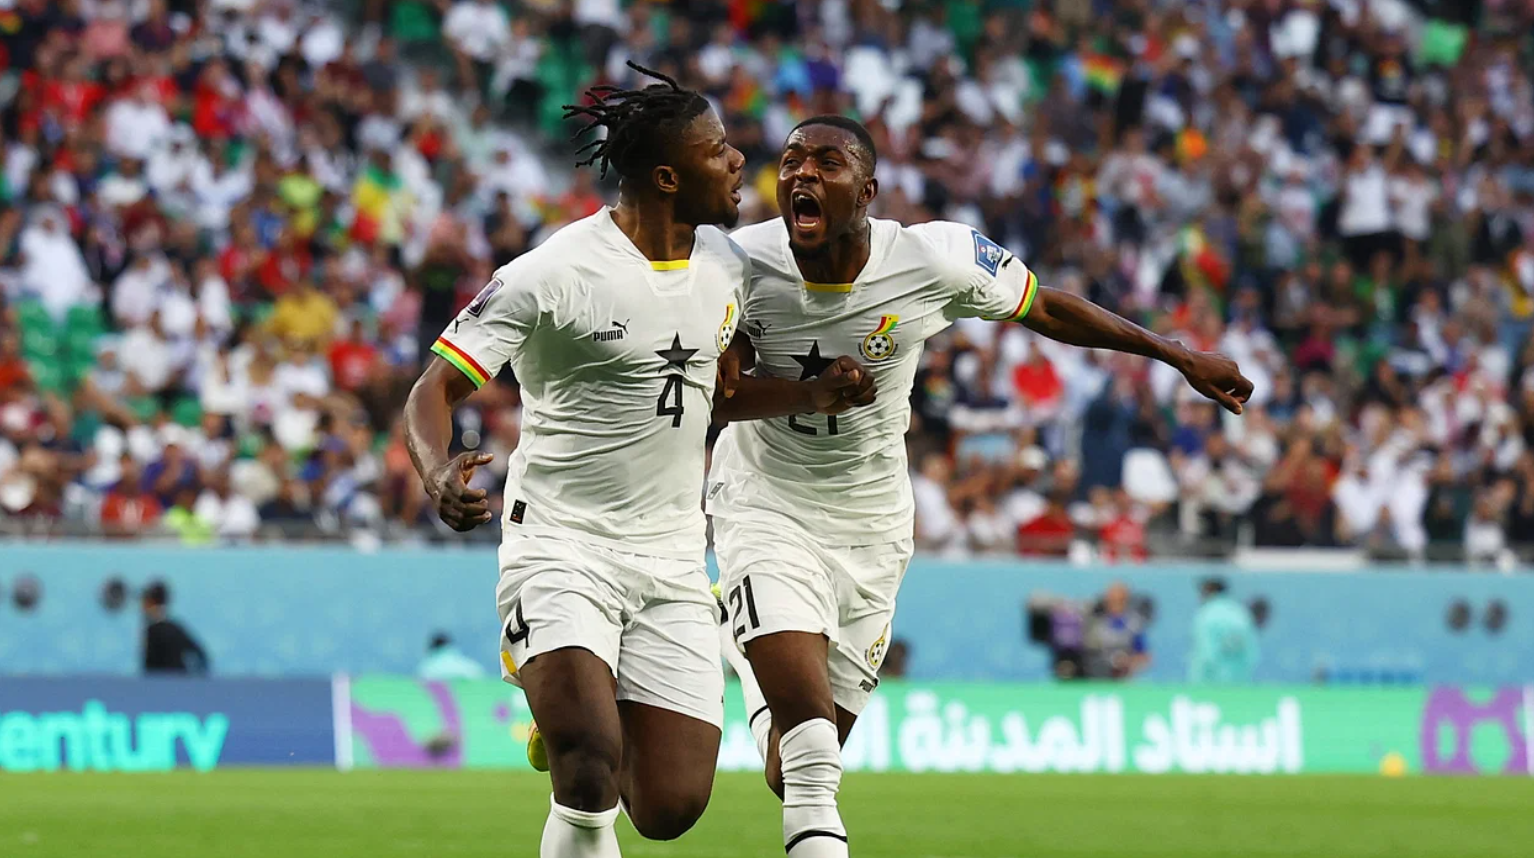 Mohammed Kudus and Mohammed Salisu led the Black Stars to their first World Cup victory in Qatar, defeating South Korea in their second group game on Monday